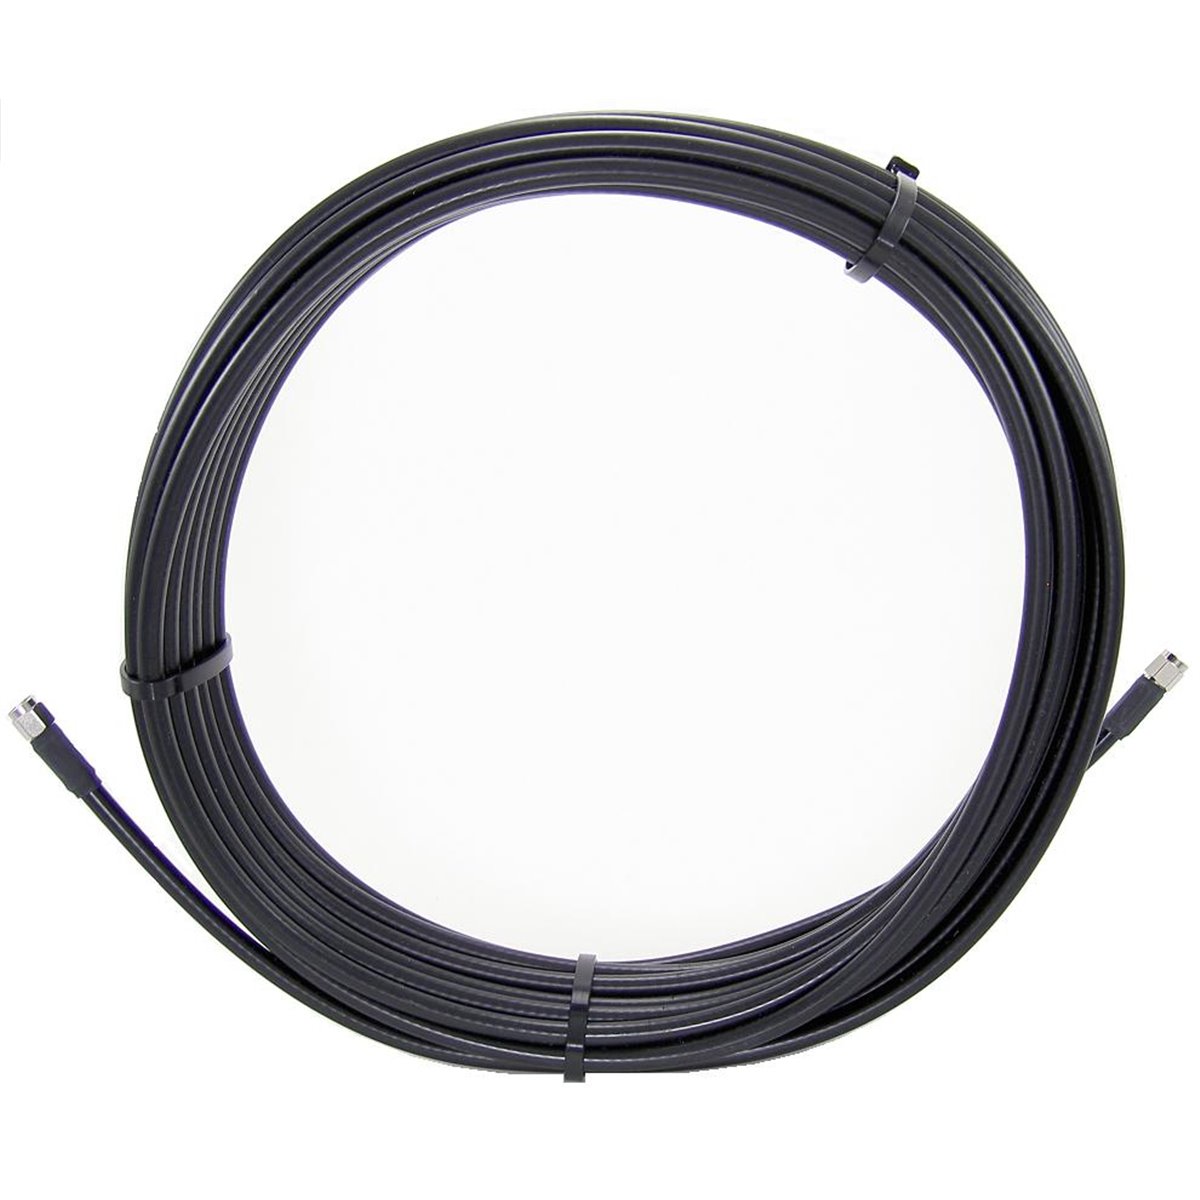 20-FT (6M) ULTRA LOW LOSS LMR-400 CABLE WITH TNC-N CONNECTOR